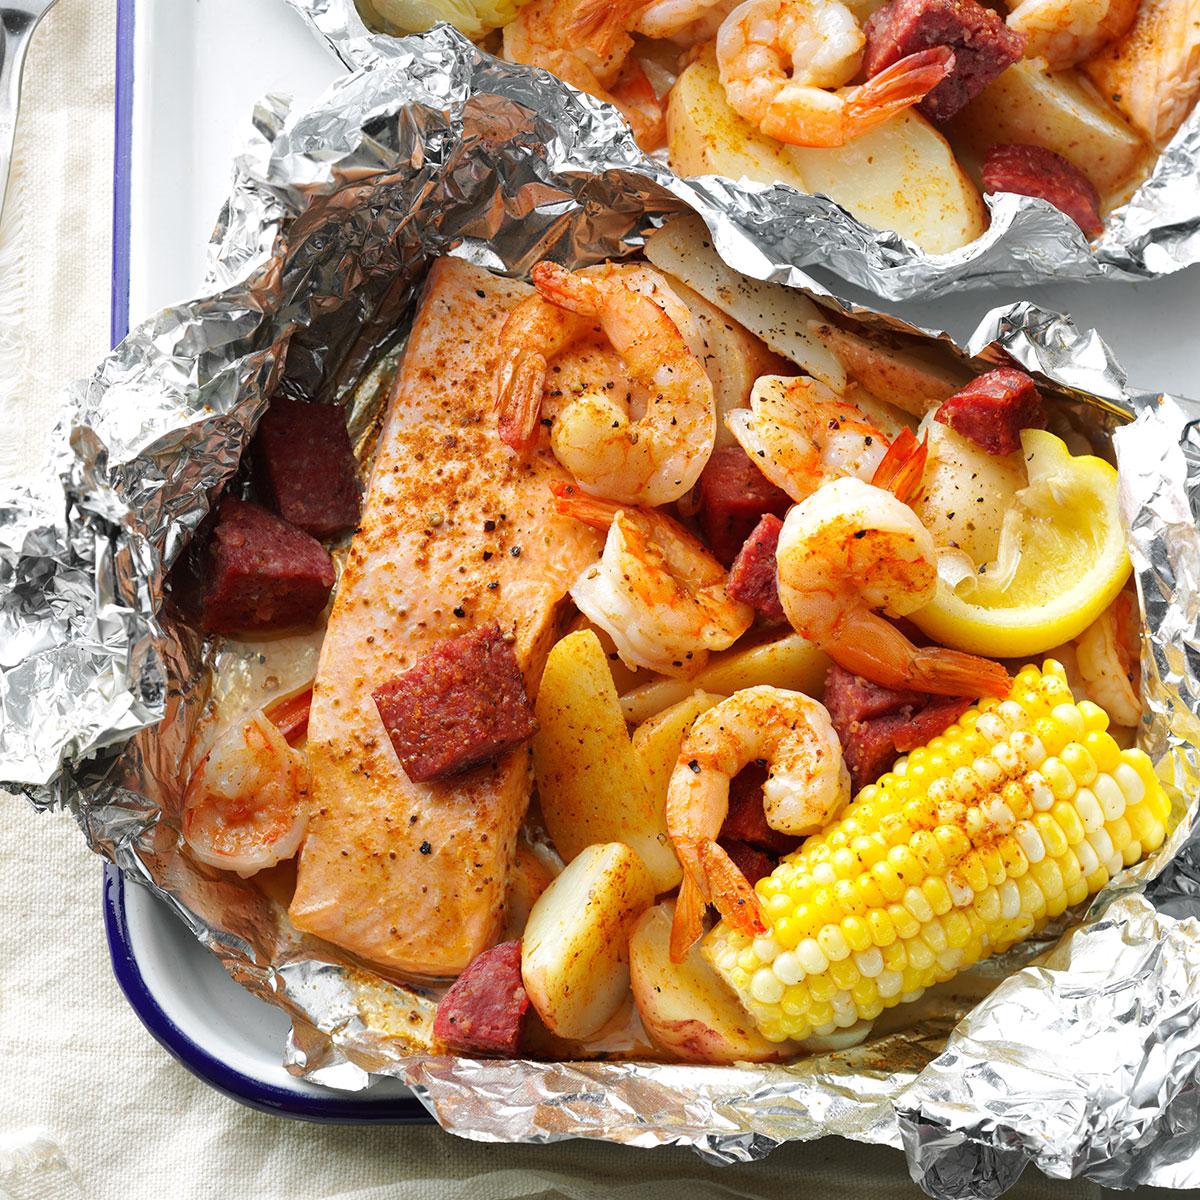 Cajun Boil On The Grill Recipe Taste Of Home,How To Make A Balloon Dog Step By Step